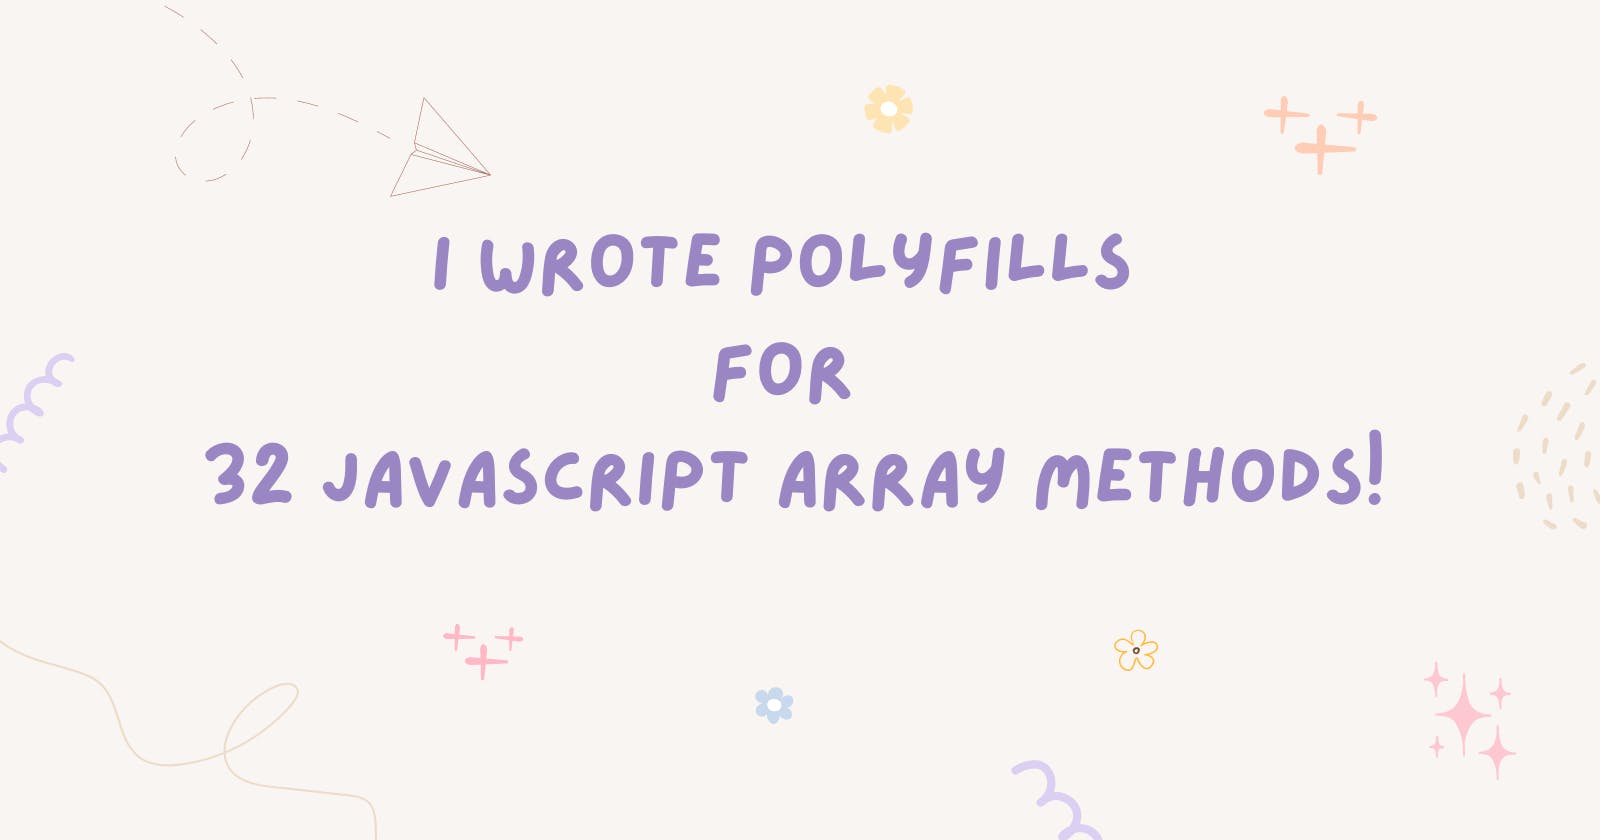 I wrote polyfills for 32 JavaScript Array methods!